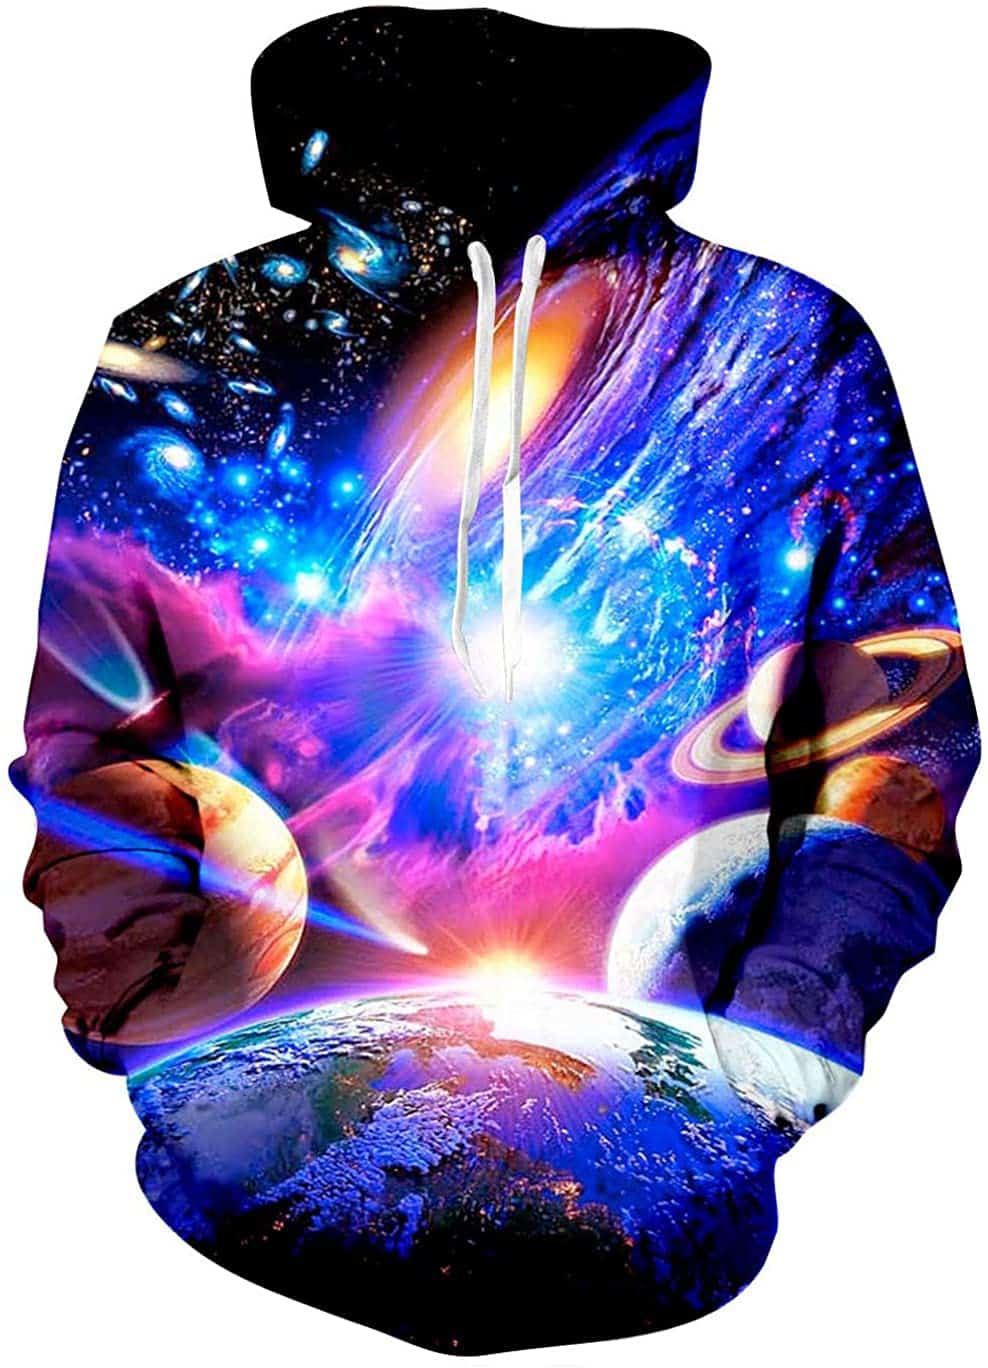 Hgvoetty Unisex 3D Print Hoodies Graphic Space Pullover Hooded Sweatshirts for Men Women 